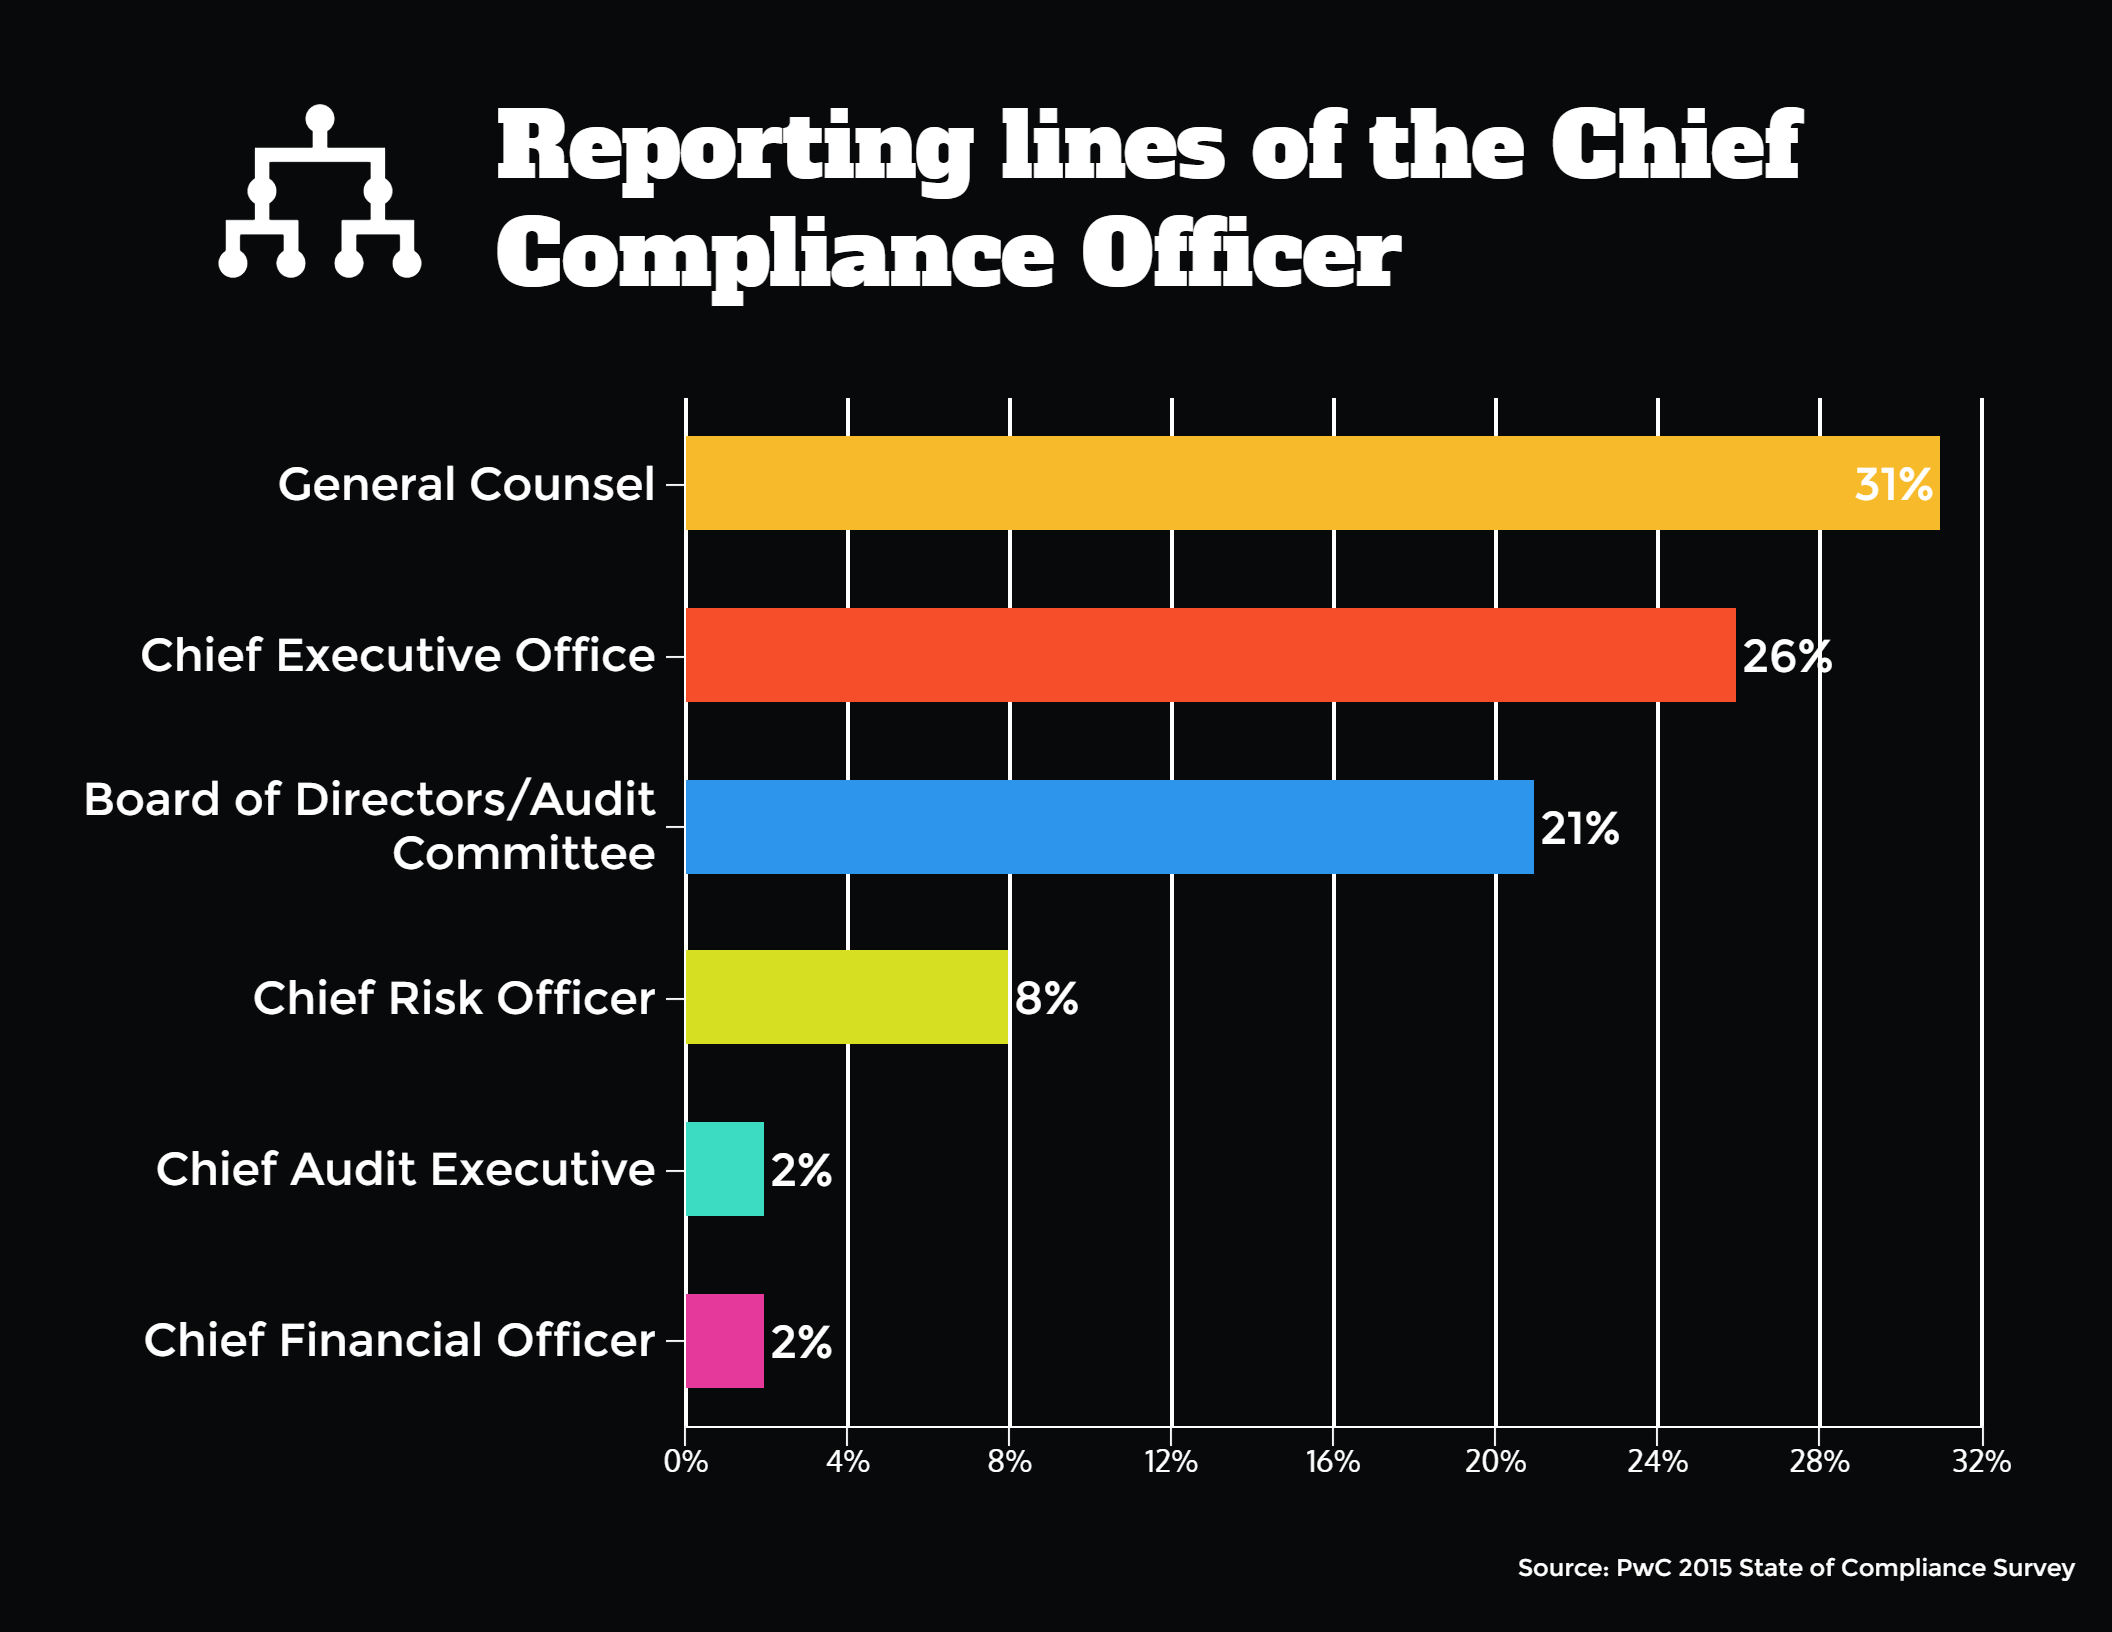 Bar graph indicating the reporting lines of the Chief Compliance Officer. Source: PwC 2015 State of Compliance Survey.